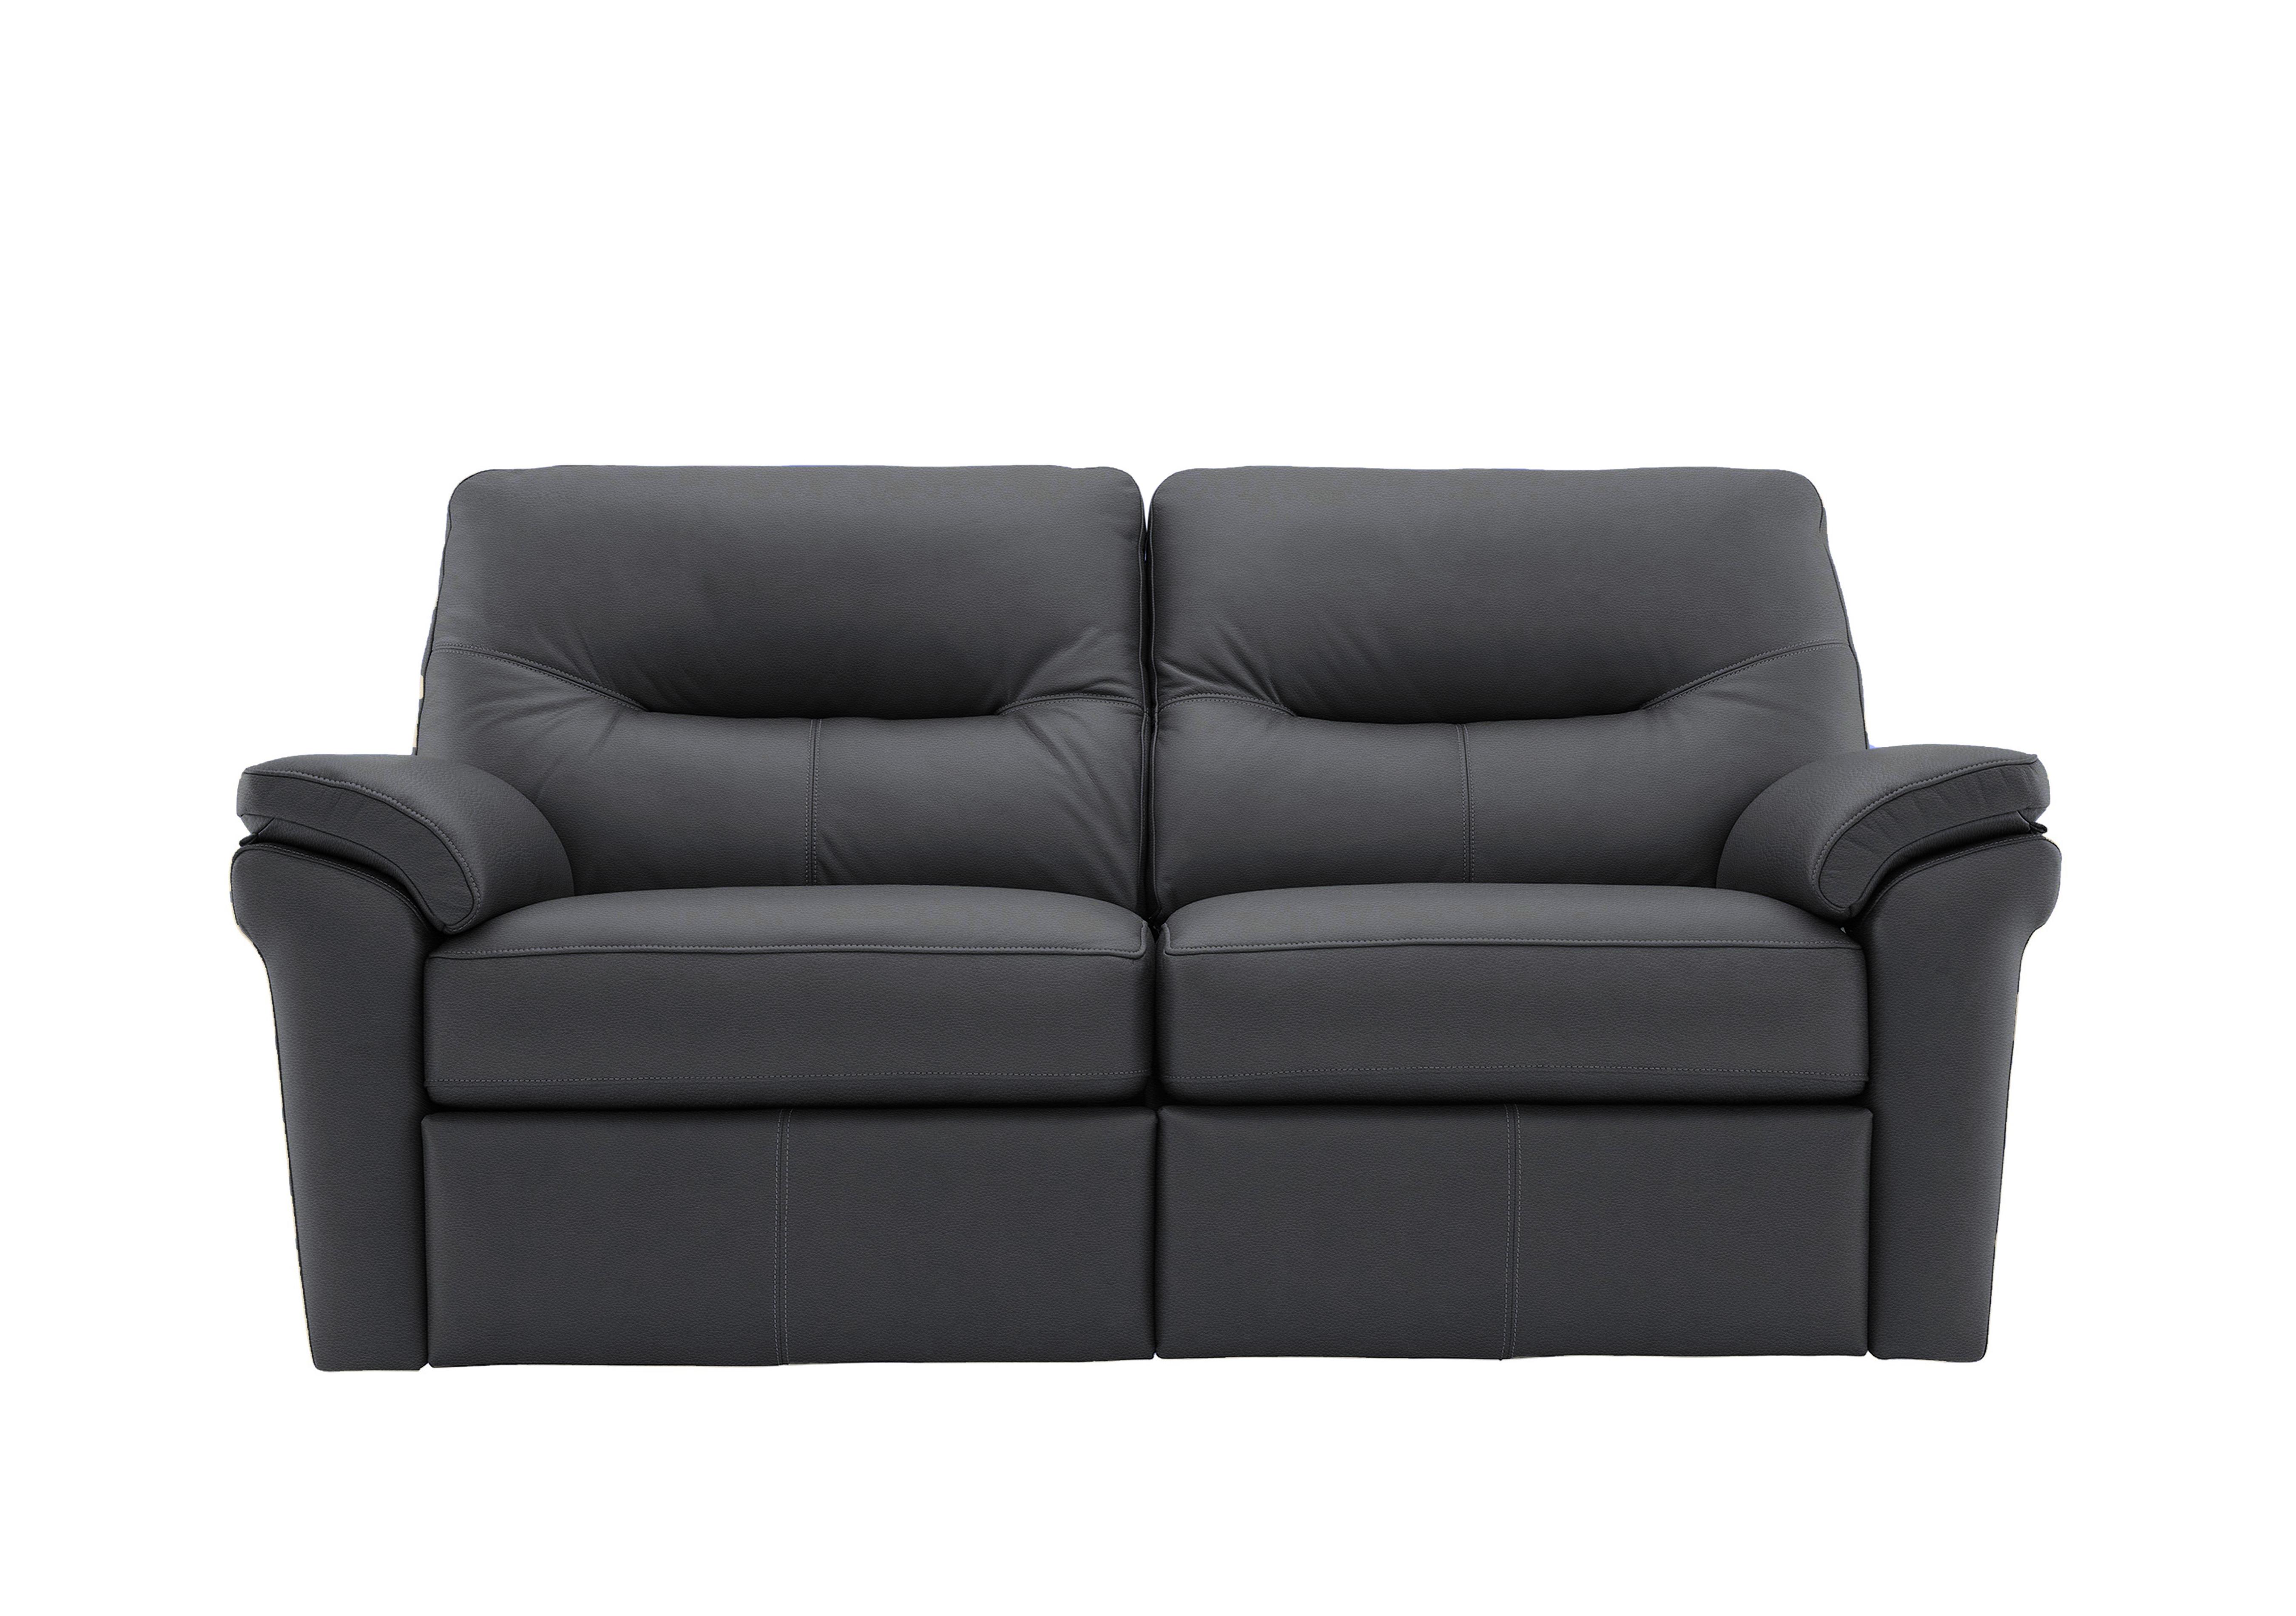 Seattle 2.5 Seater Leather Power Recliner Sofa with Power Lumbar in L852 Cambridge Petrol Blue on Furniture Village